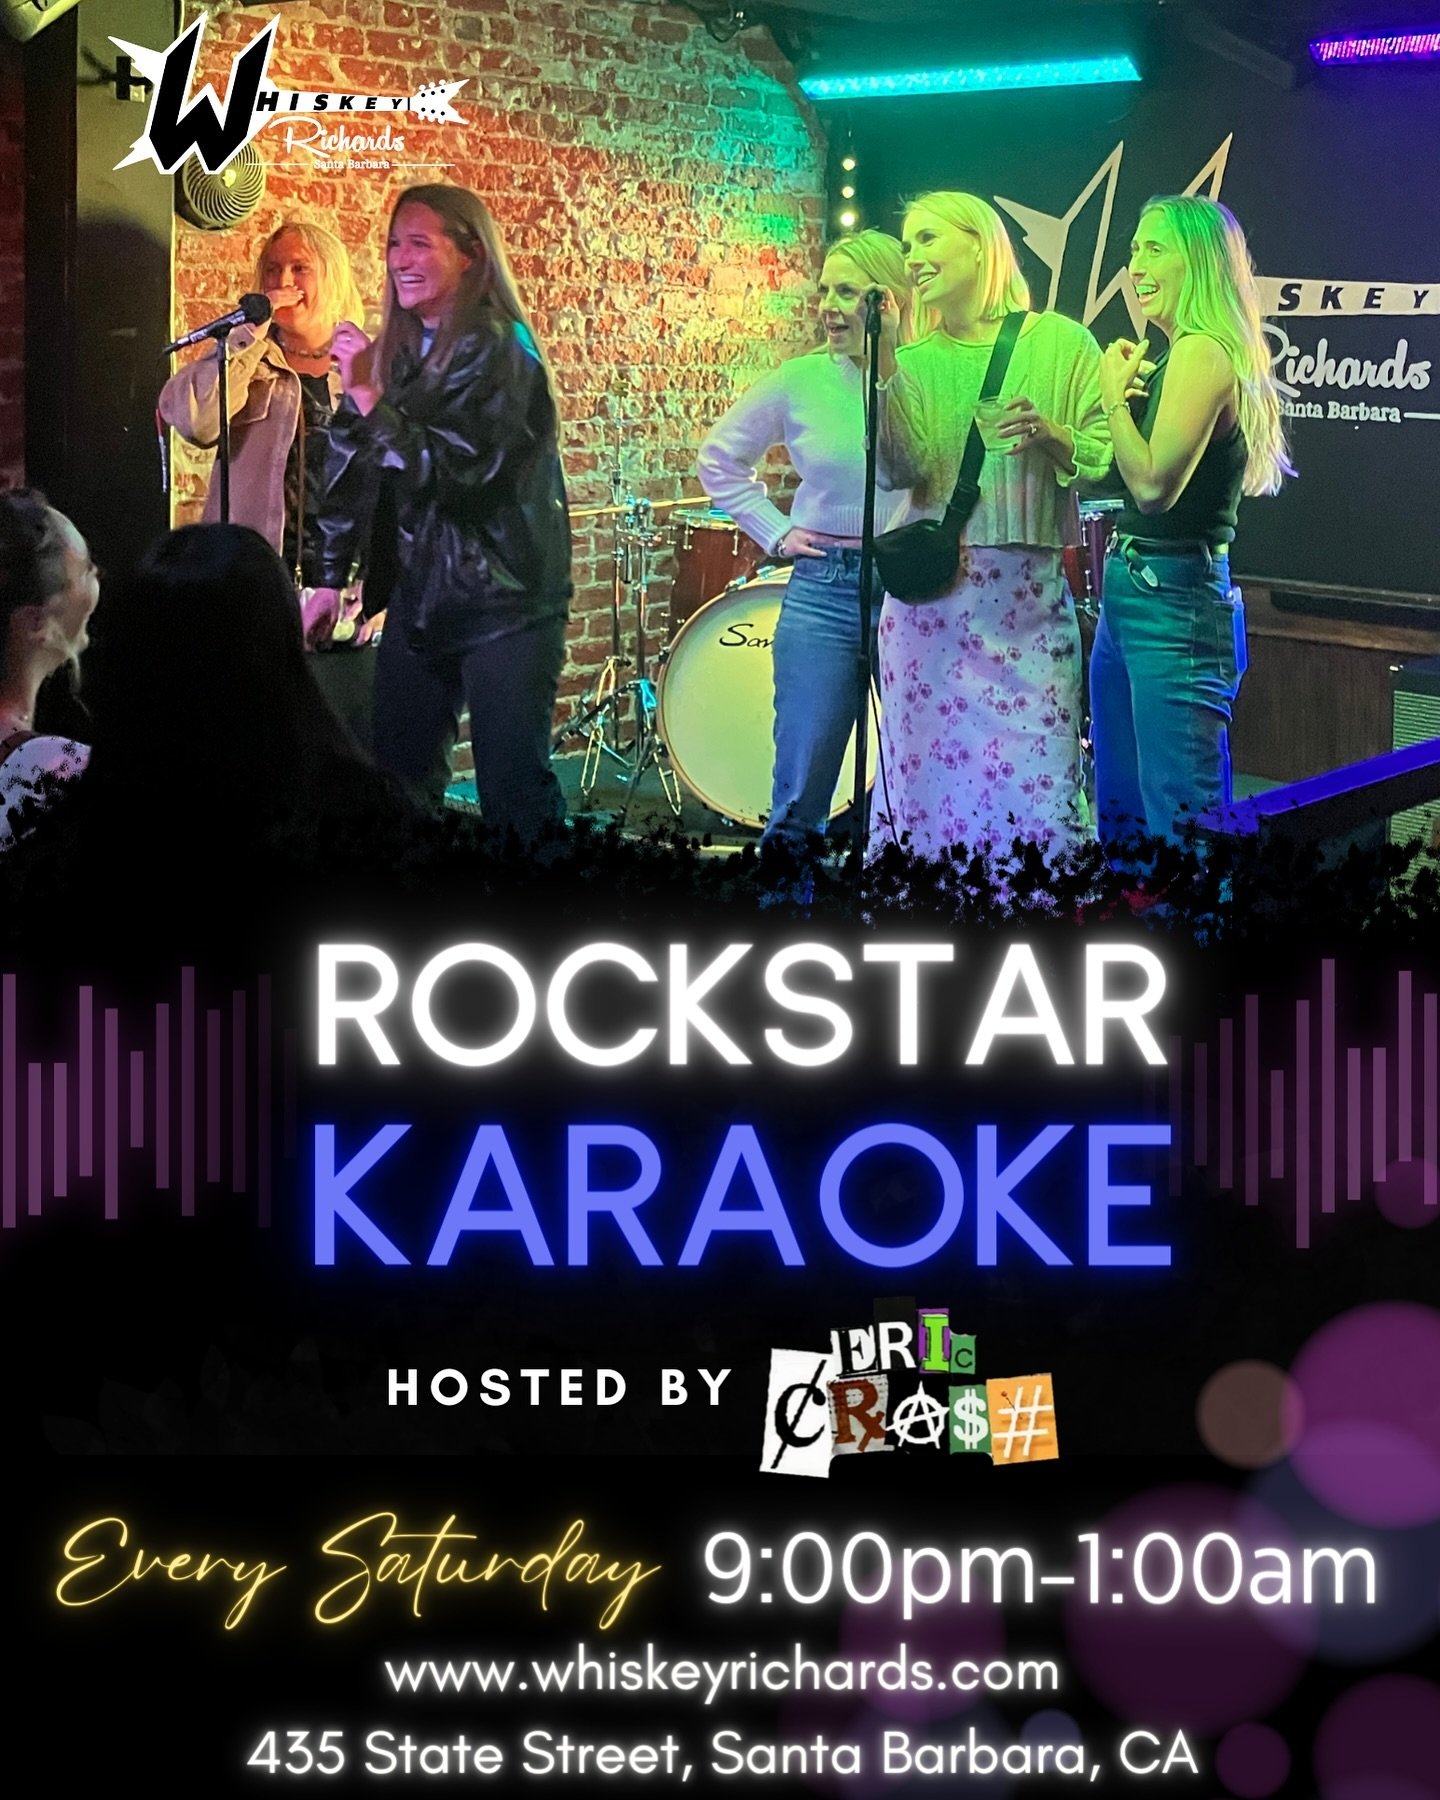 Experience the ultimate Rockstar Karaoke nights at Whiskey Richards, where lights, music, and attitude collide! Unleash your inner rock legend and bring your A-game to rock the night away! #RockstarKaraoke #DowntownSB #MagicMoments #SantaBarbara #Whi